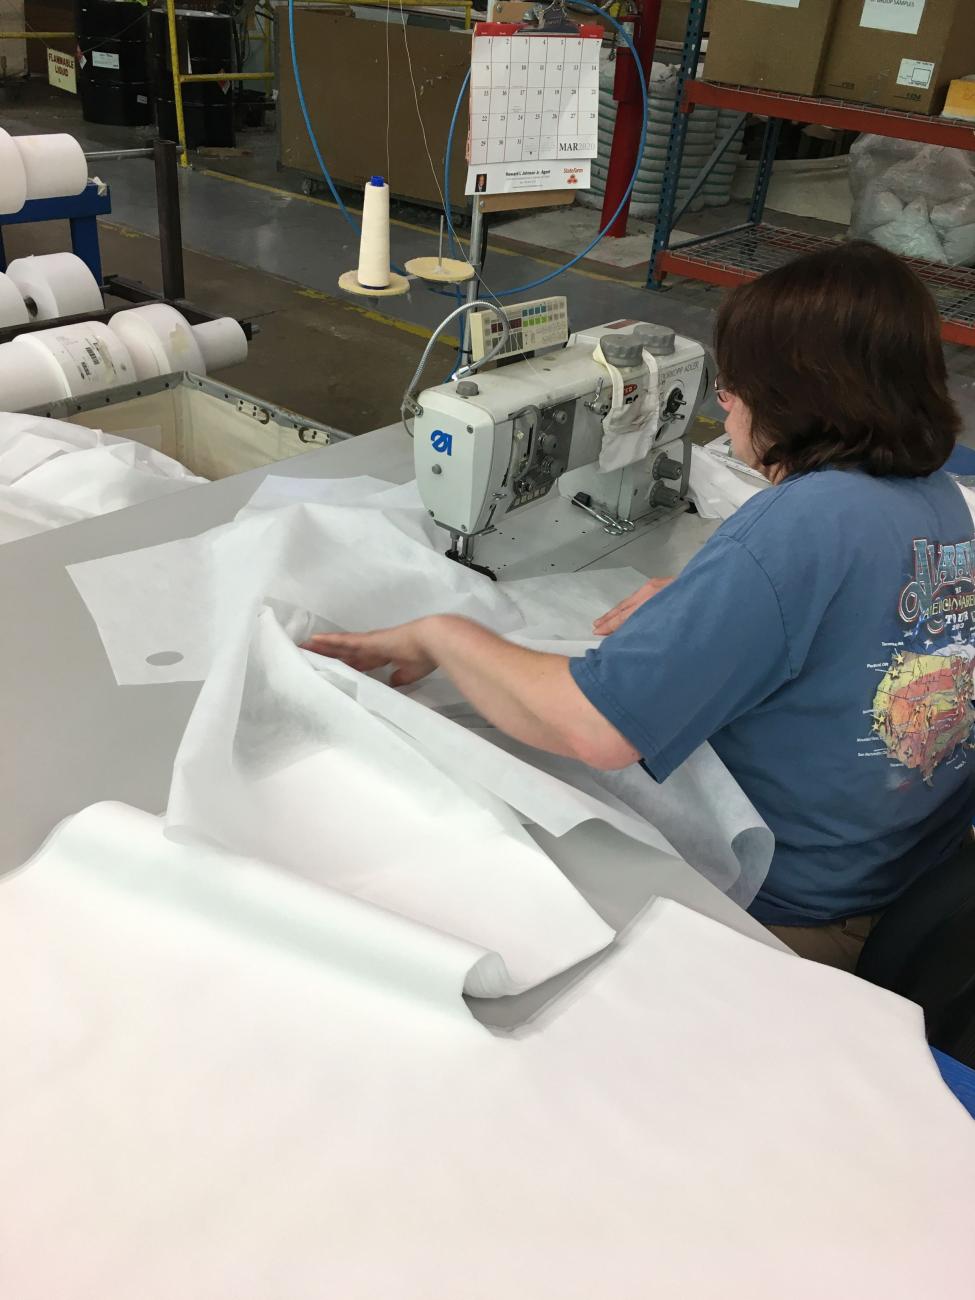 HSM employee sewing medical gowns